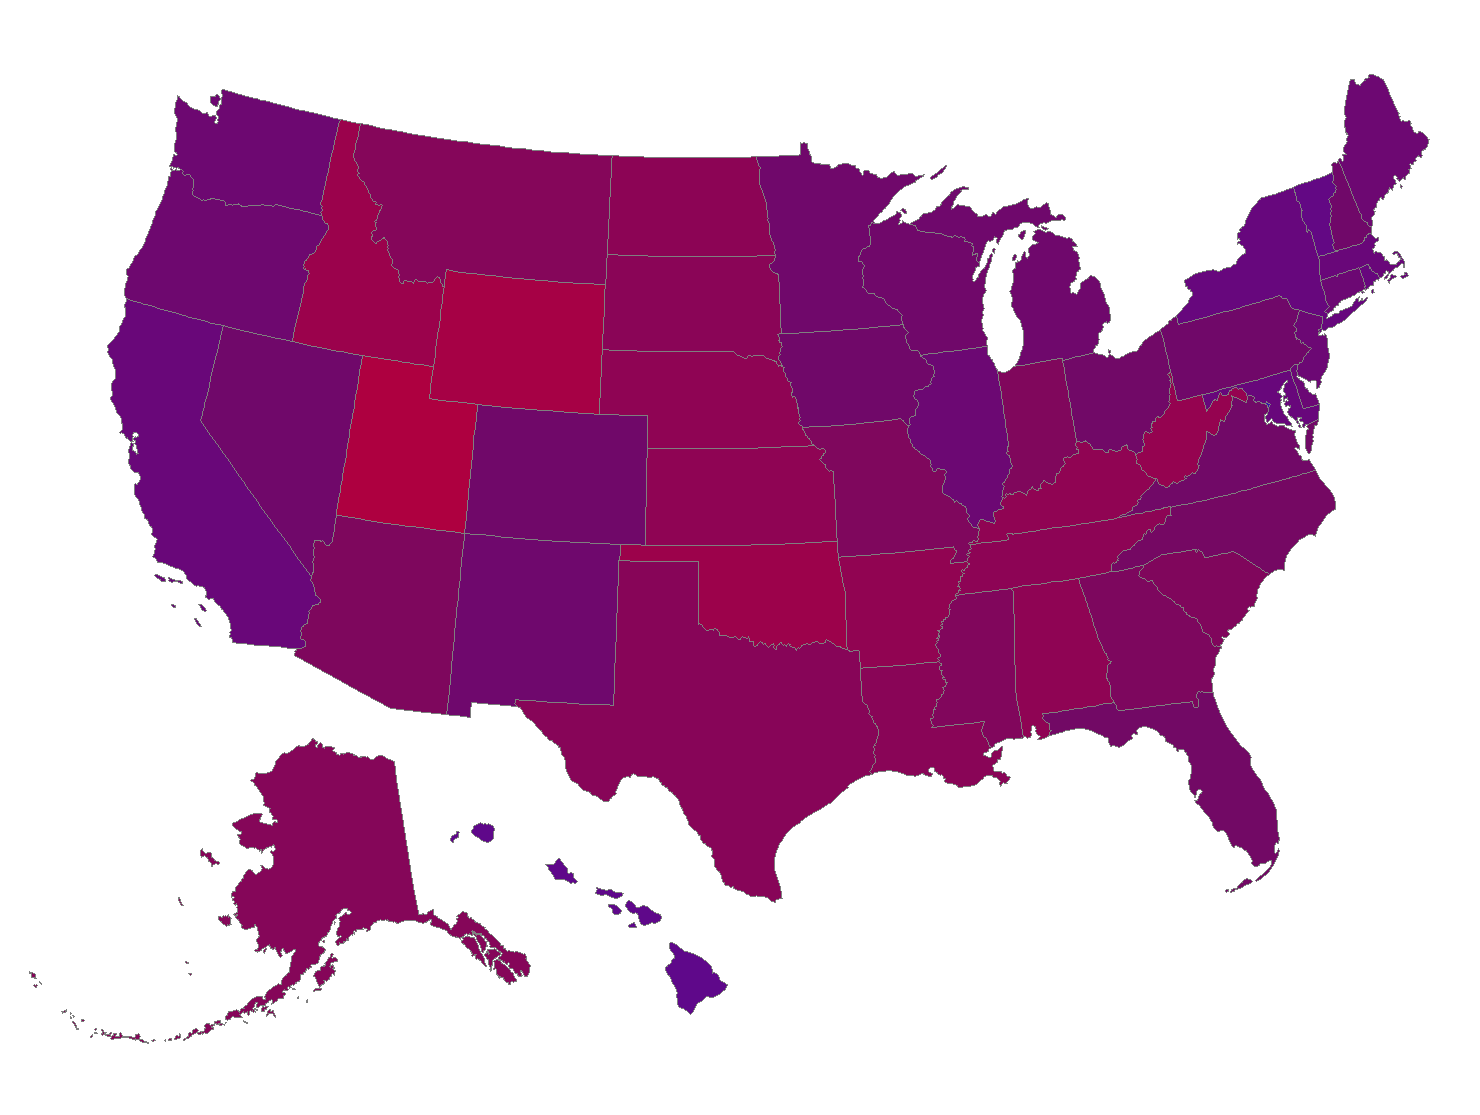 US map with states in various shades of purple